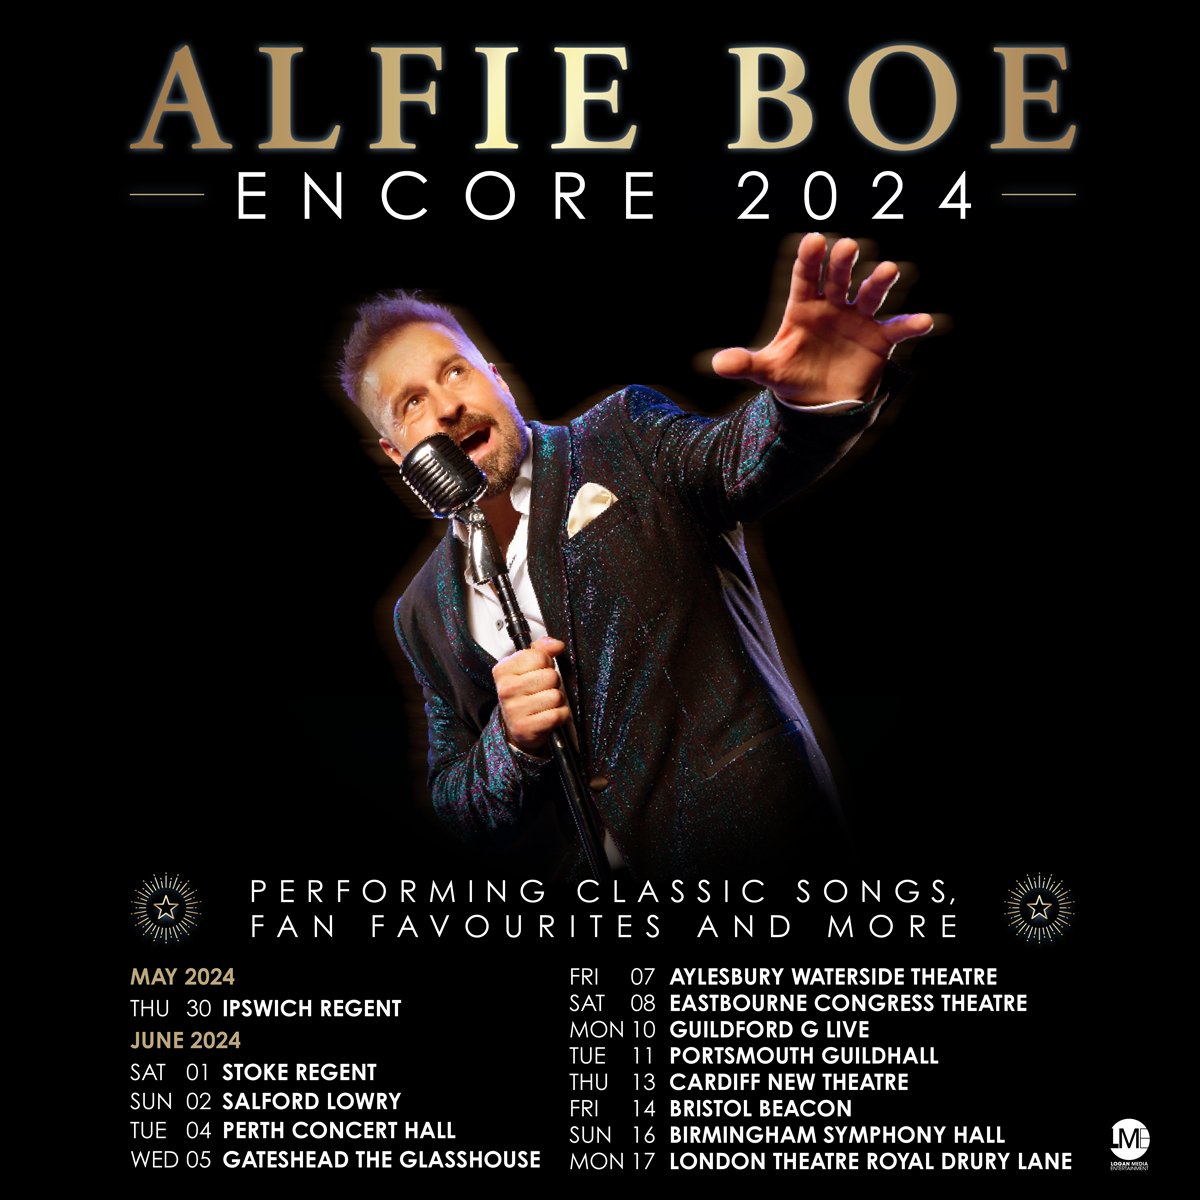 ON SALE ANNOUNCEMENT! Alfie Boe is coming to Eastbourne as part of his 2024 tour Encore is at the Congress Theatre on 8 June Tickets on sale 10am THIS Friday 1 December @AlfieBoe #eastbourne #onsale #alfieboe